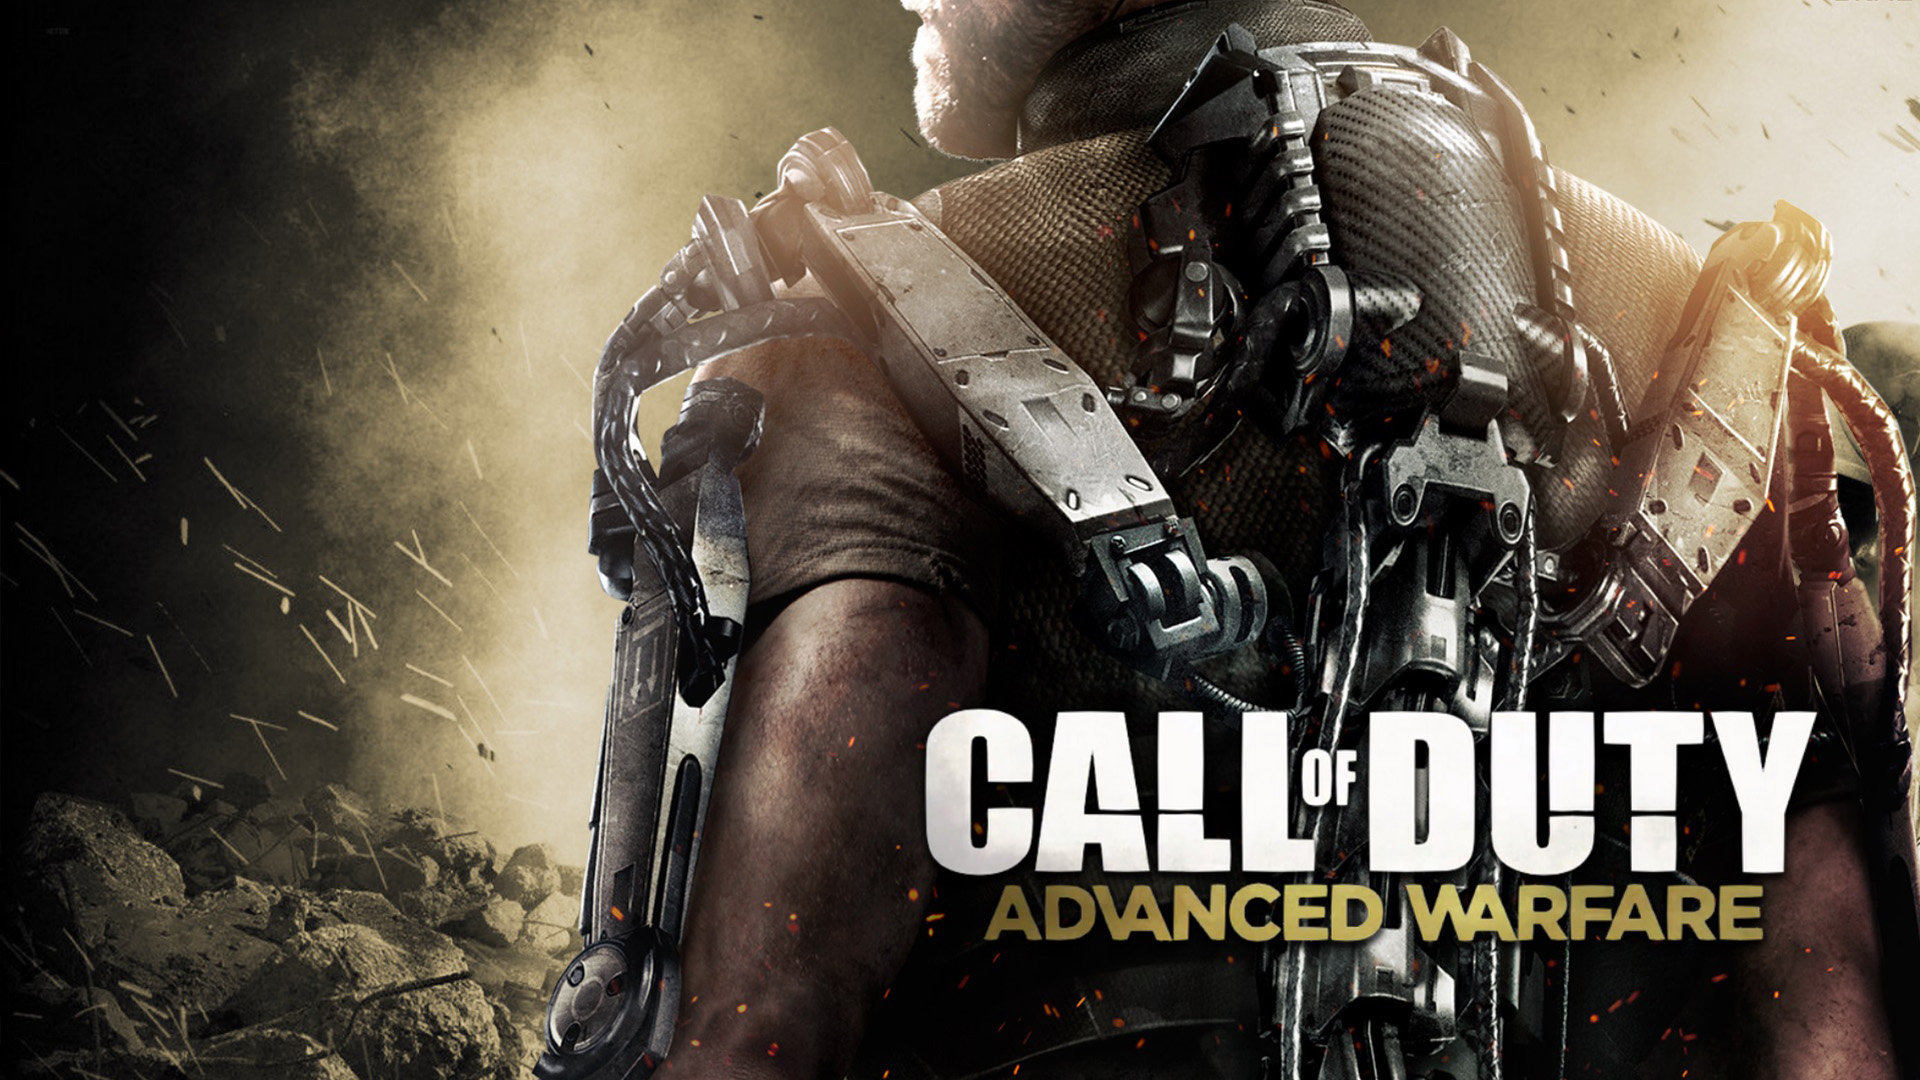 Download full hd 1920x1080 Call Of Duty: Advanced Warfare PC background ID:315179 for free